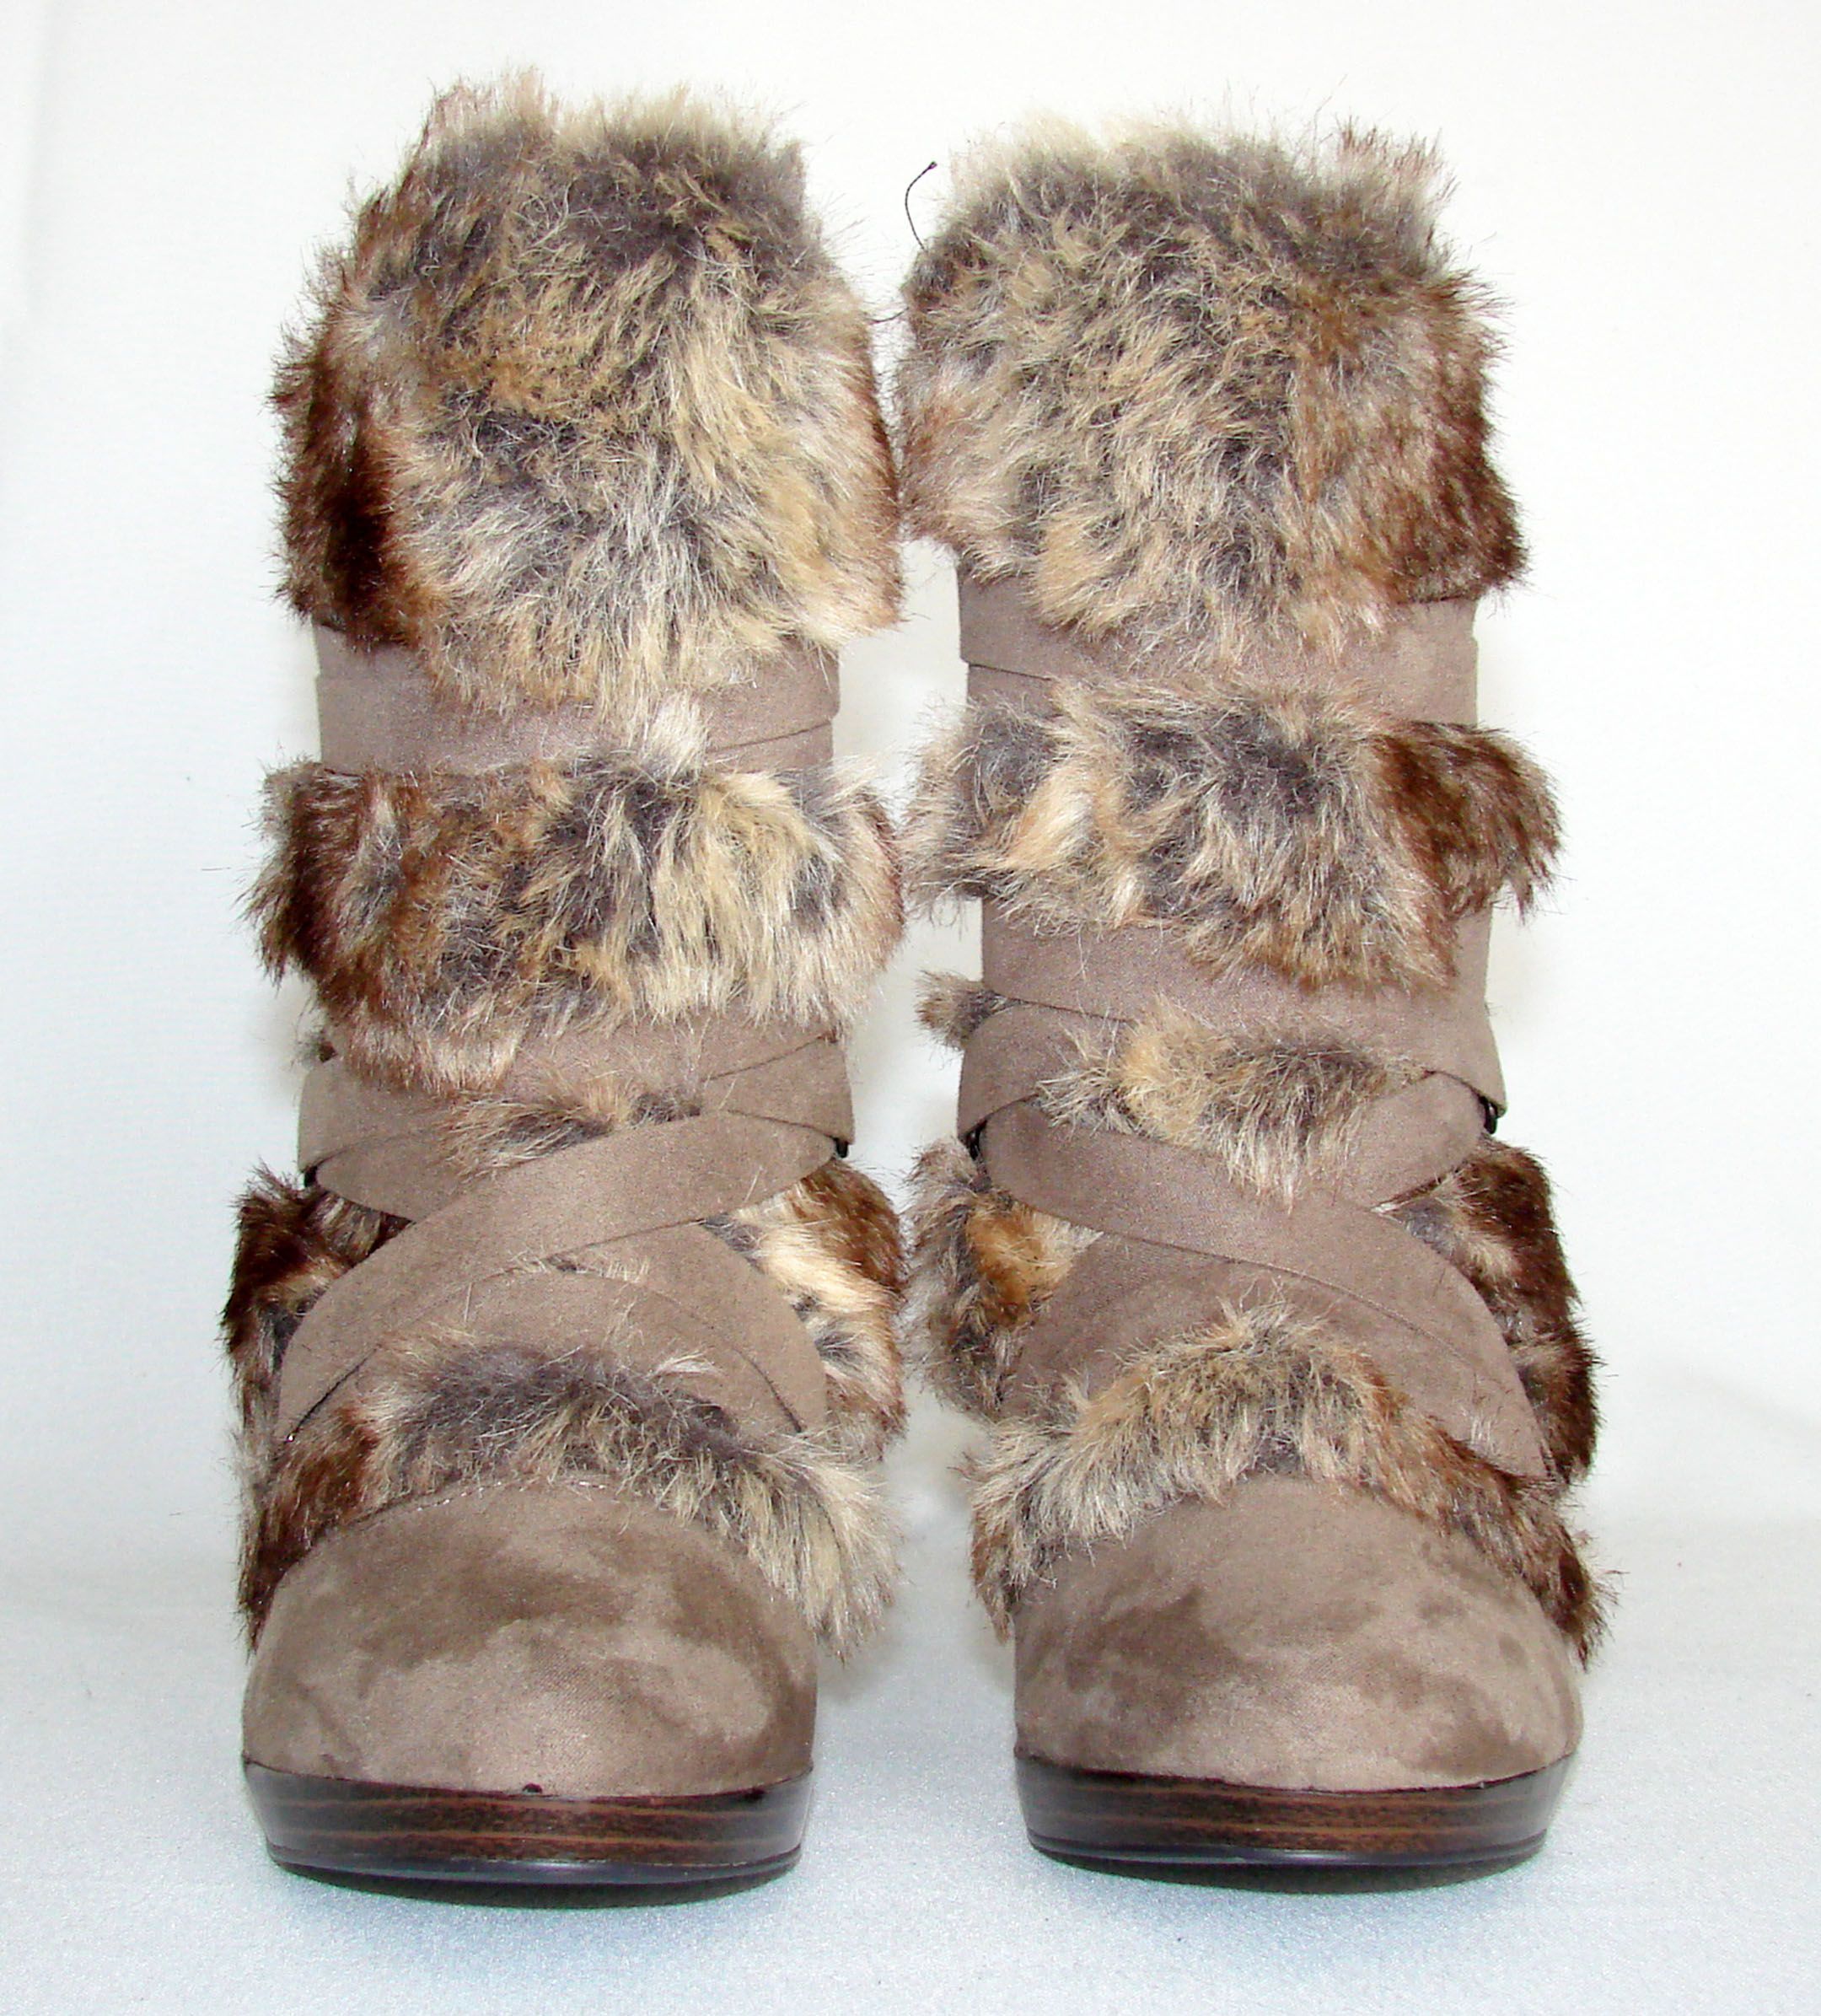 ELLE Sz 9 Taupe Suede & Fur Ankle Boots 4 Stacked High Heel Zippered